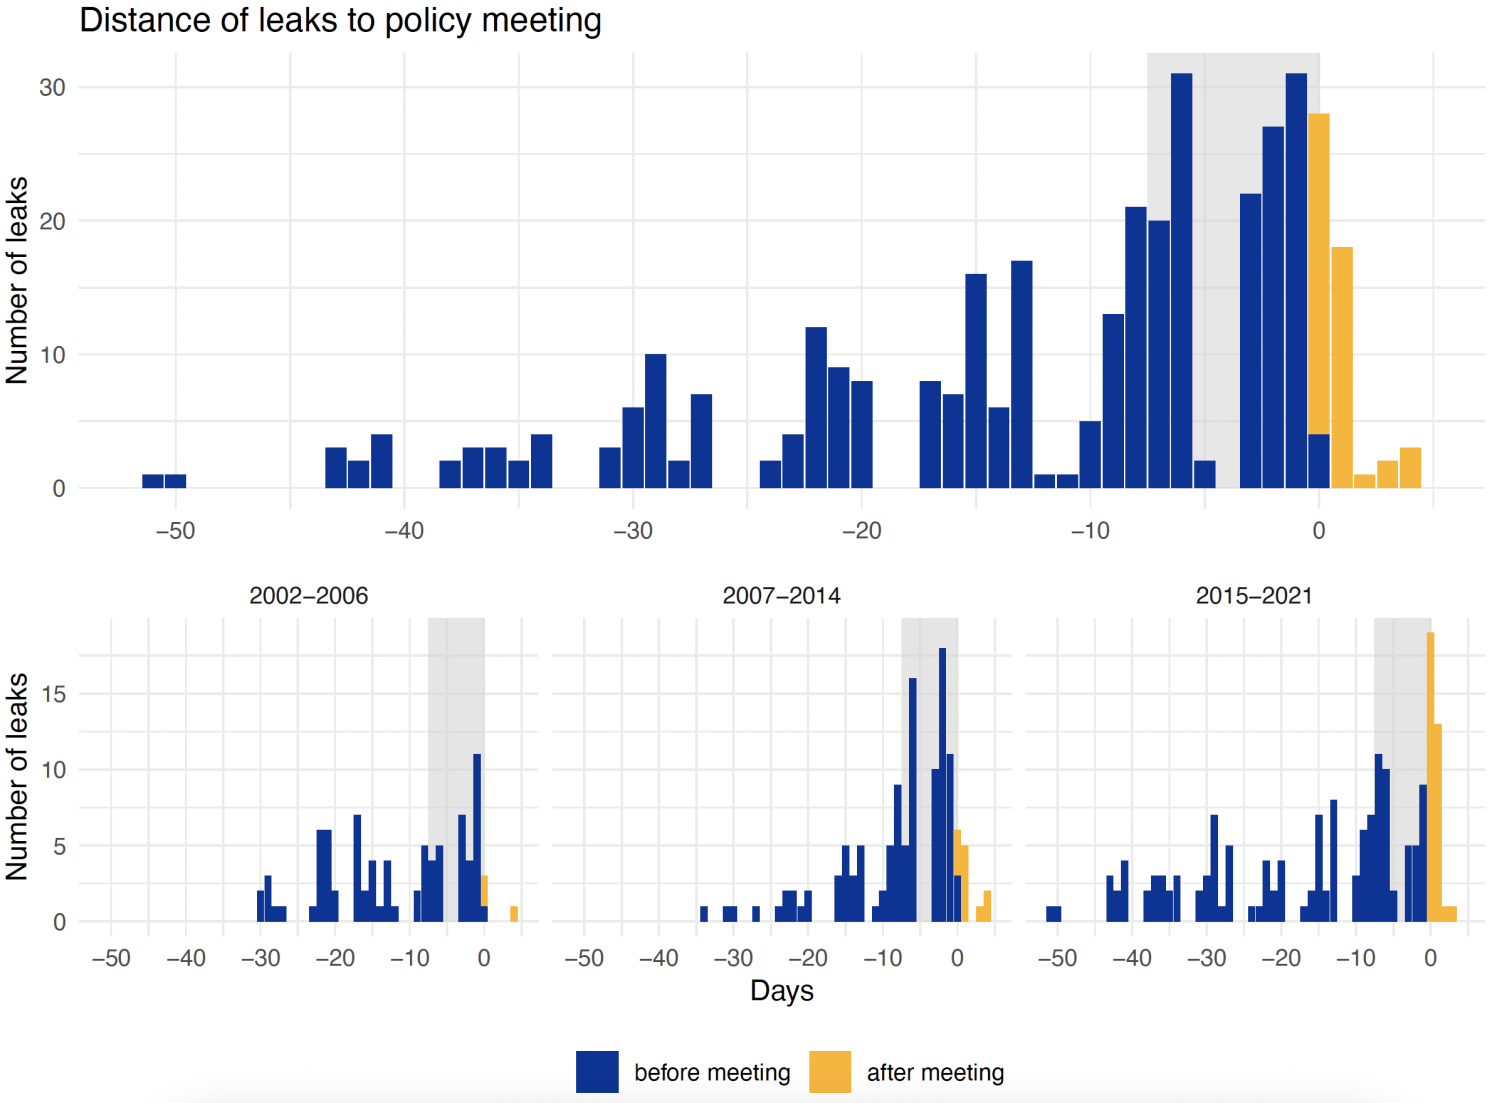 Figure 3 Distance of leaks to policy meeting